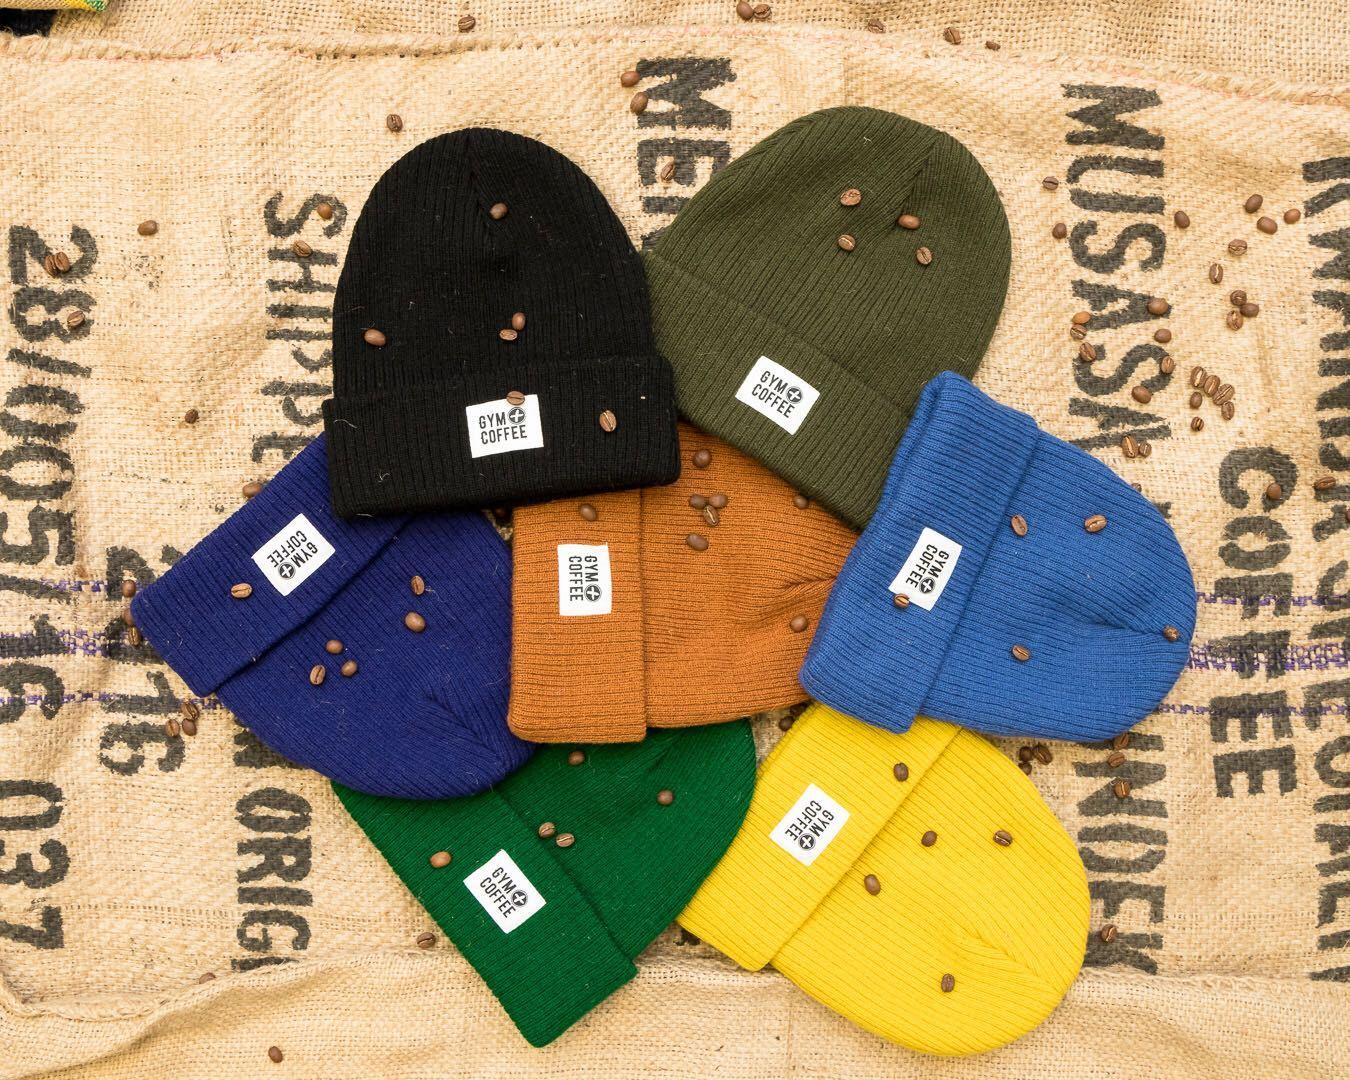 Help decide our new beanies! | Gym+Coffee USA